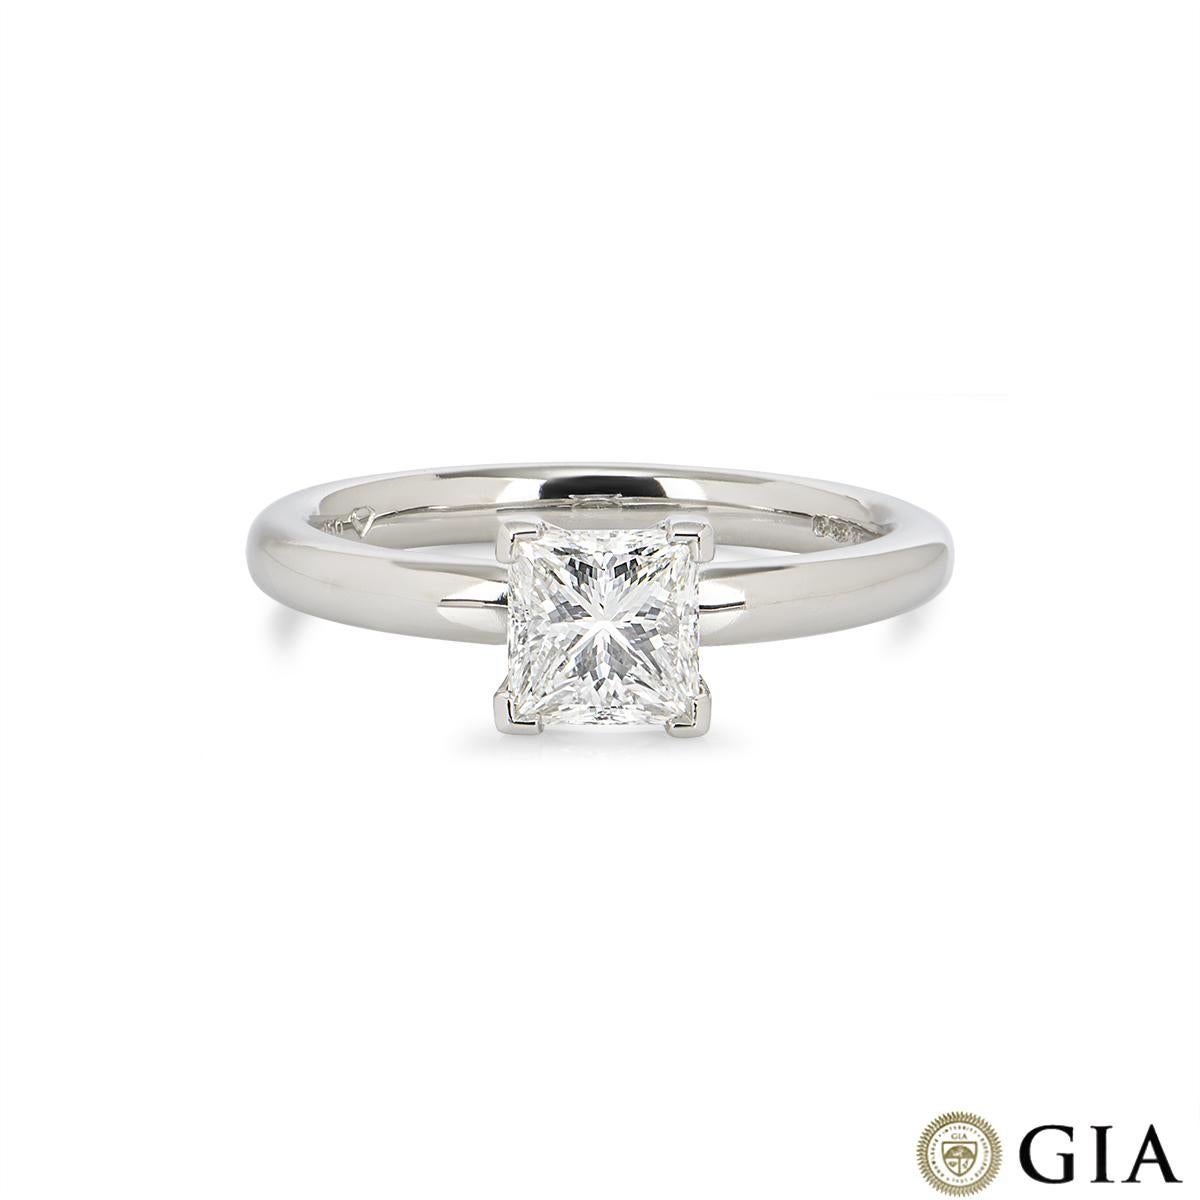 GIA Certified Platinum Princess Cut Diamond Ring 1.01ct G/VS1 In New Condition For Sale In London, GB